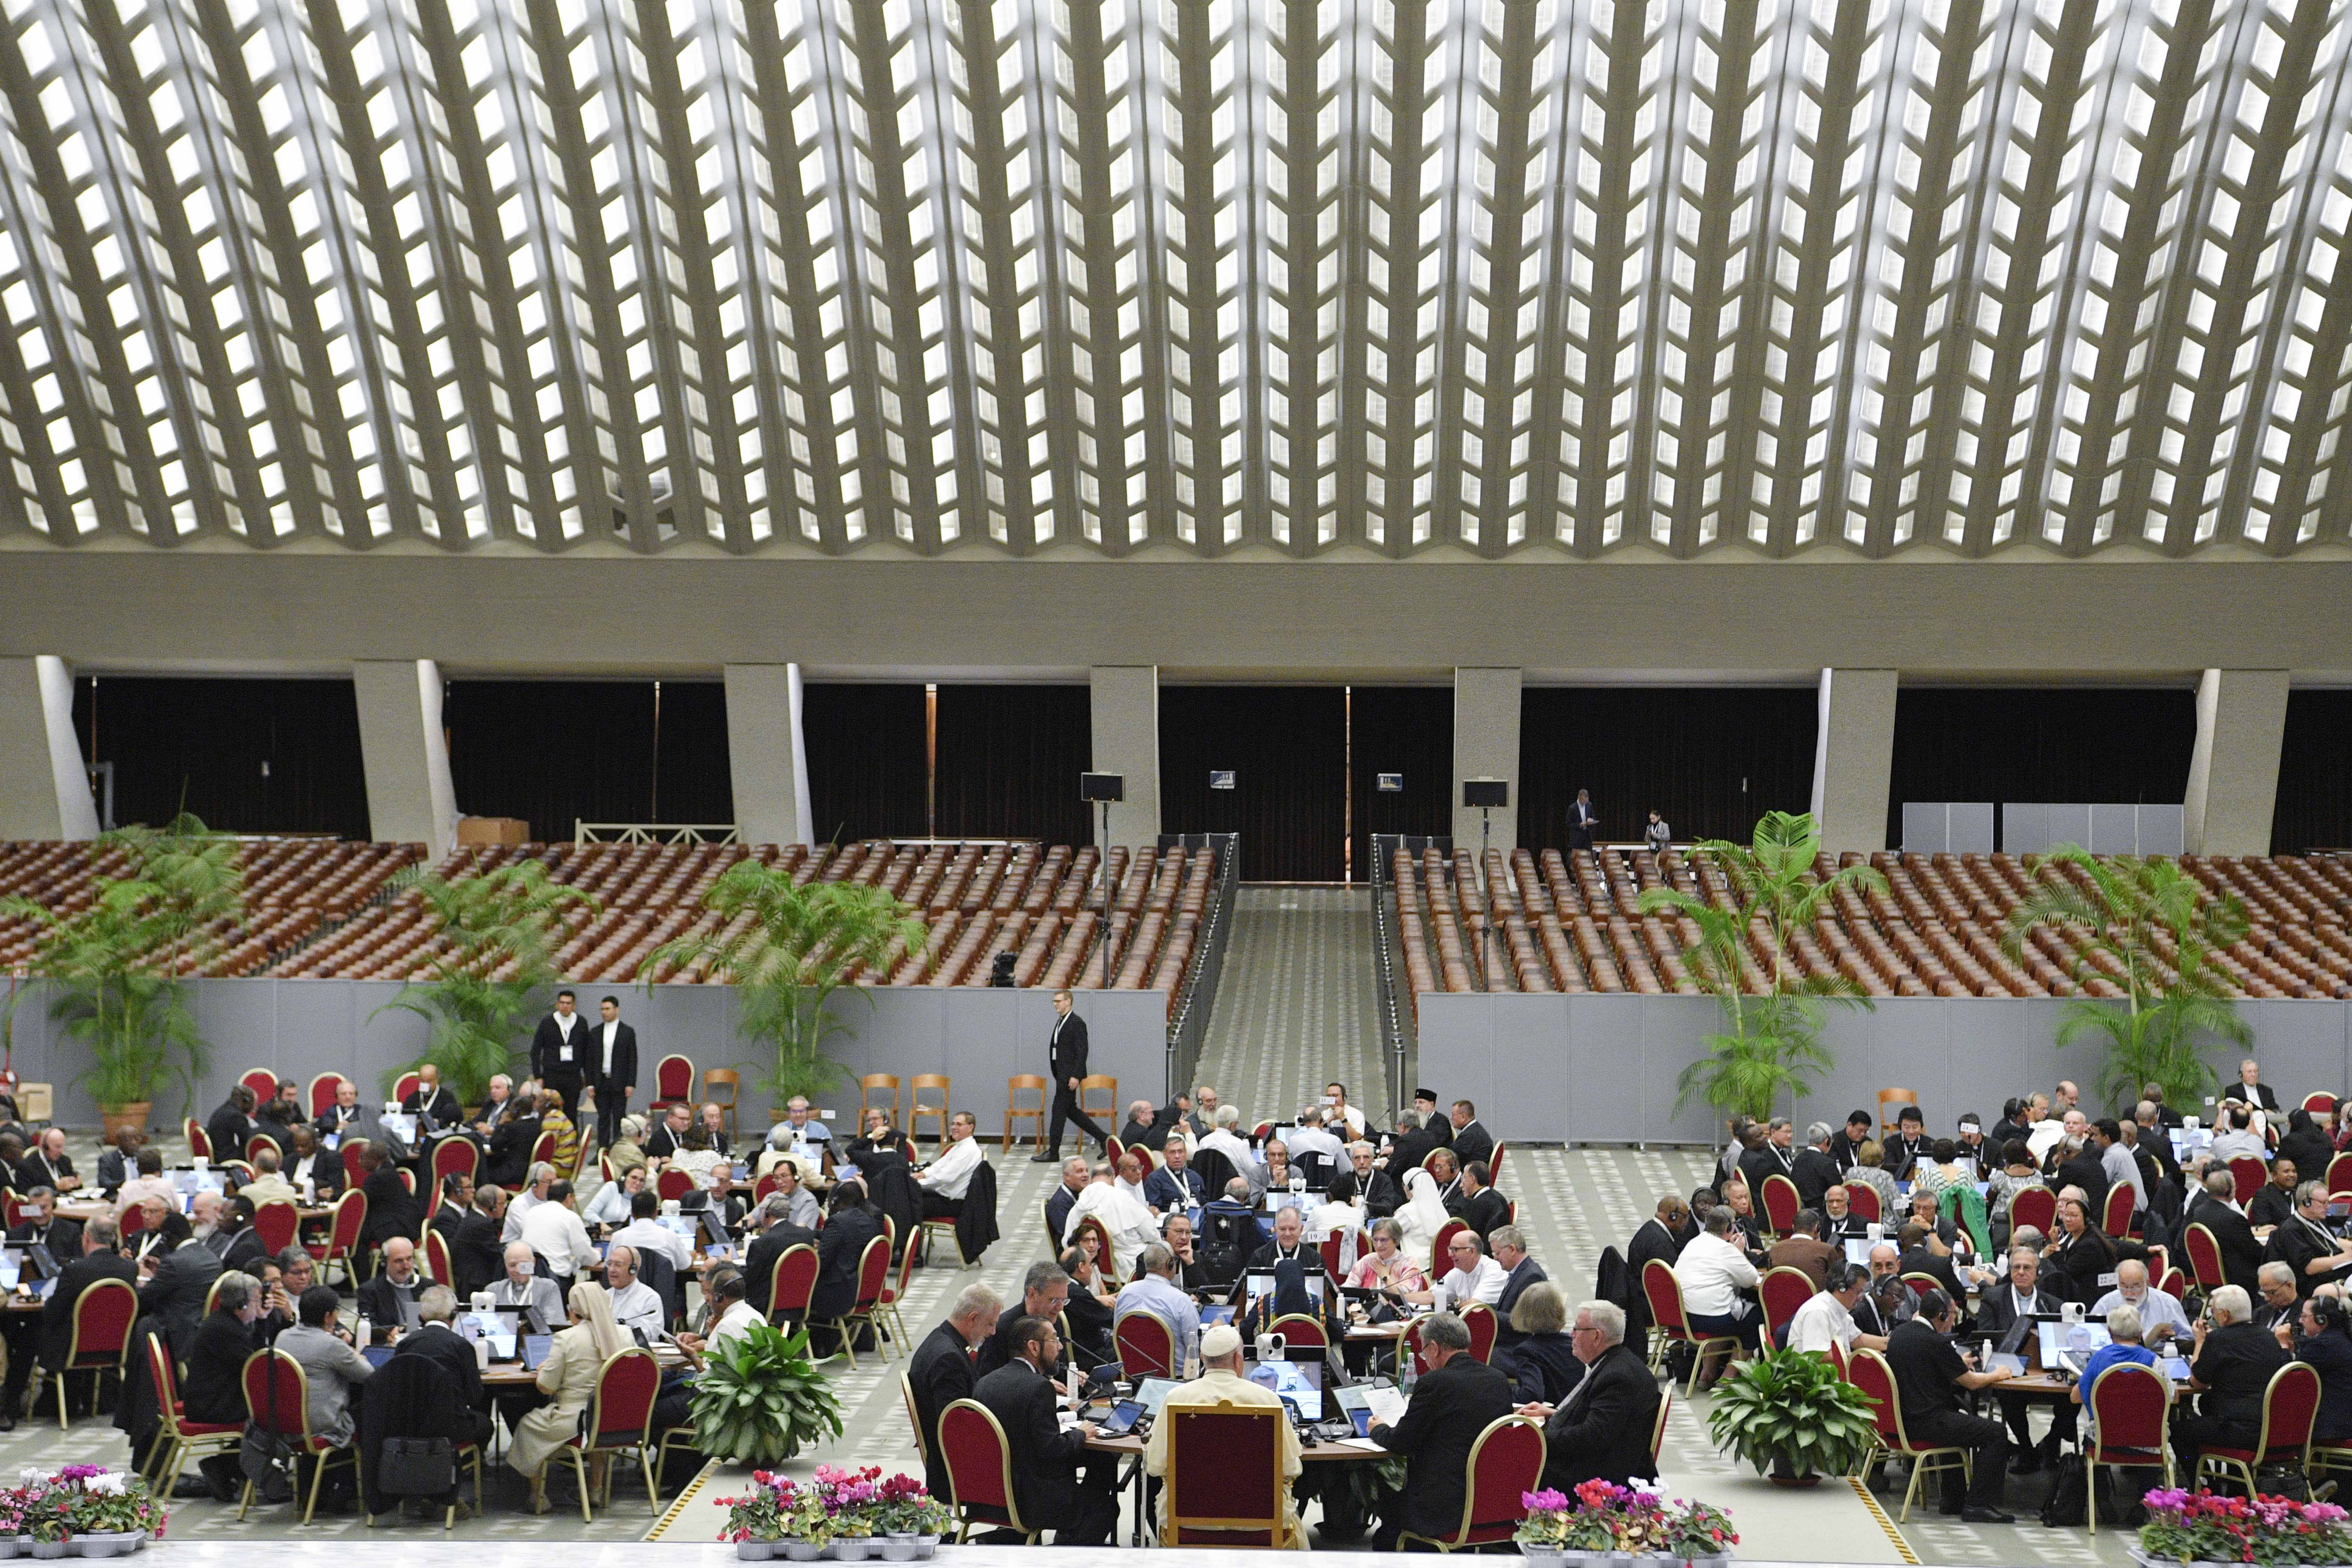 Synod on Synodality: Who is overseeing the draft report at the end of the assembly?